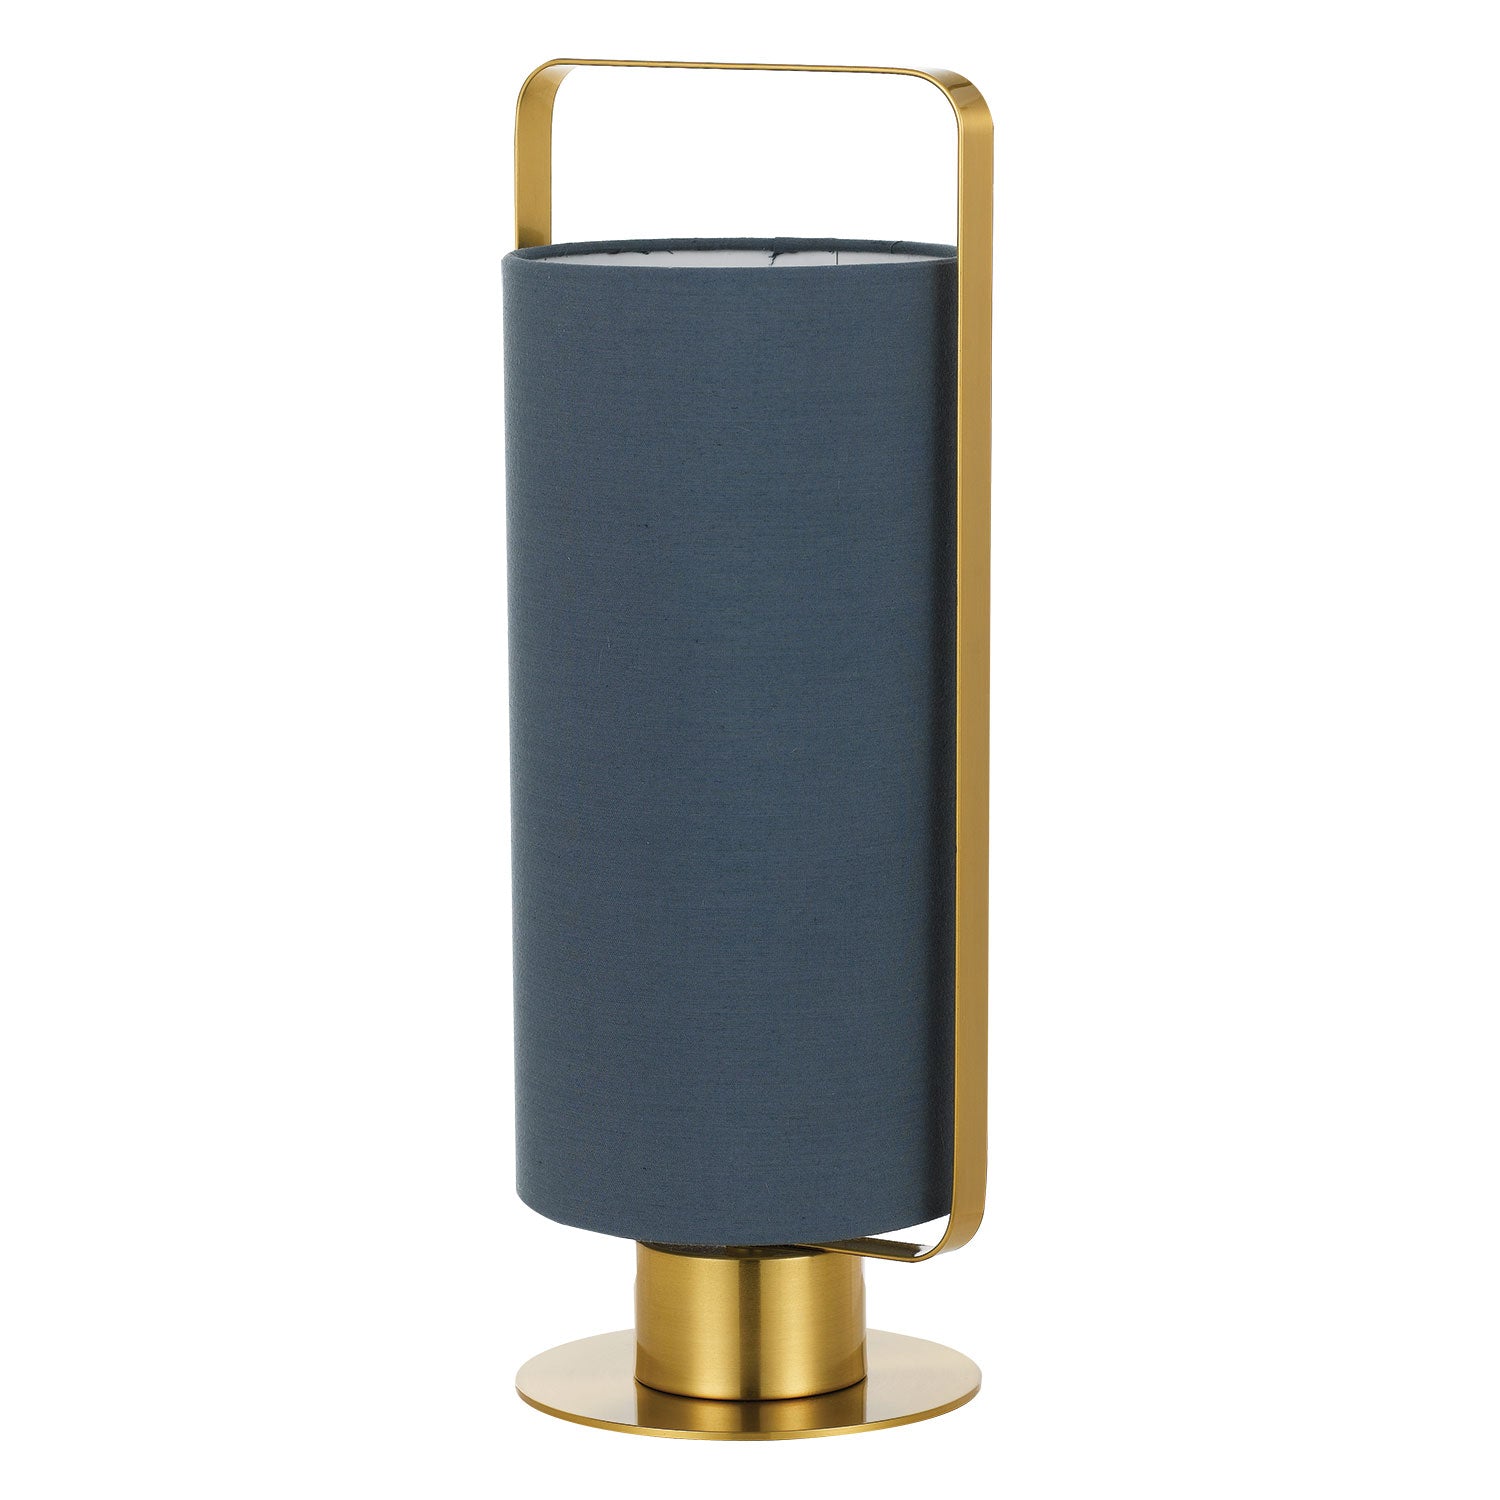 Orwel Blue and Antique Gold Modern Table Lamp